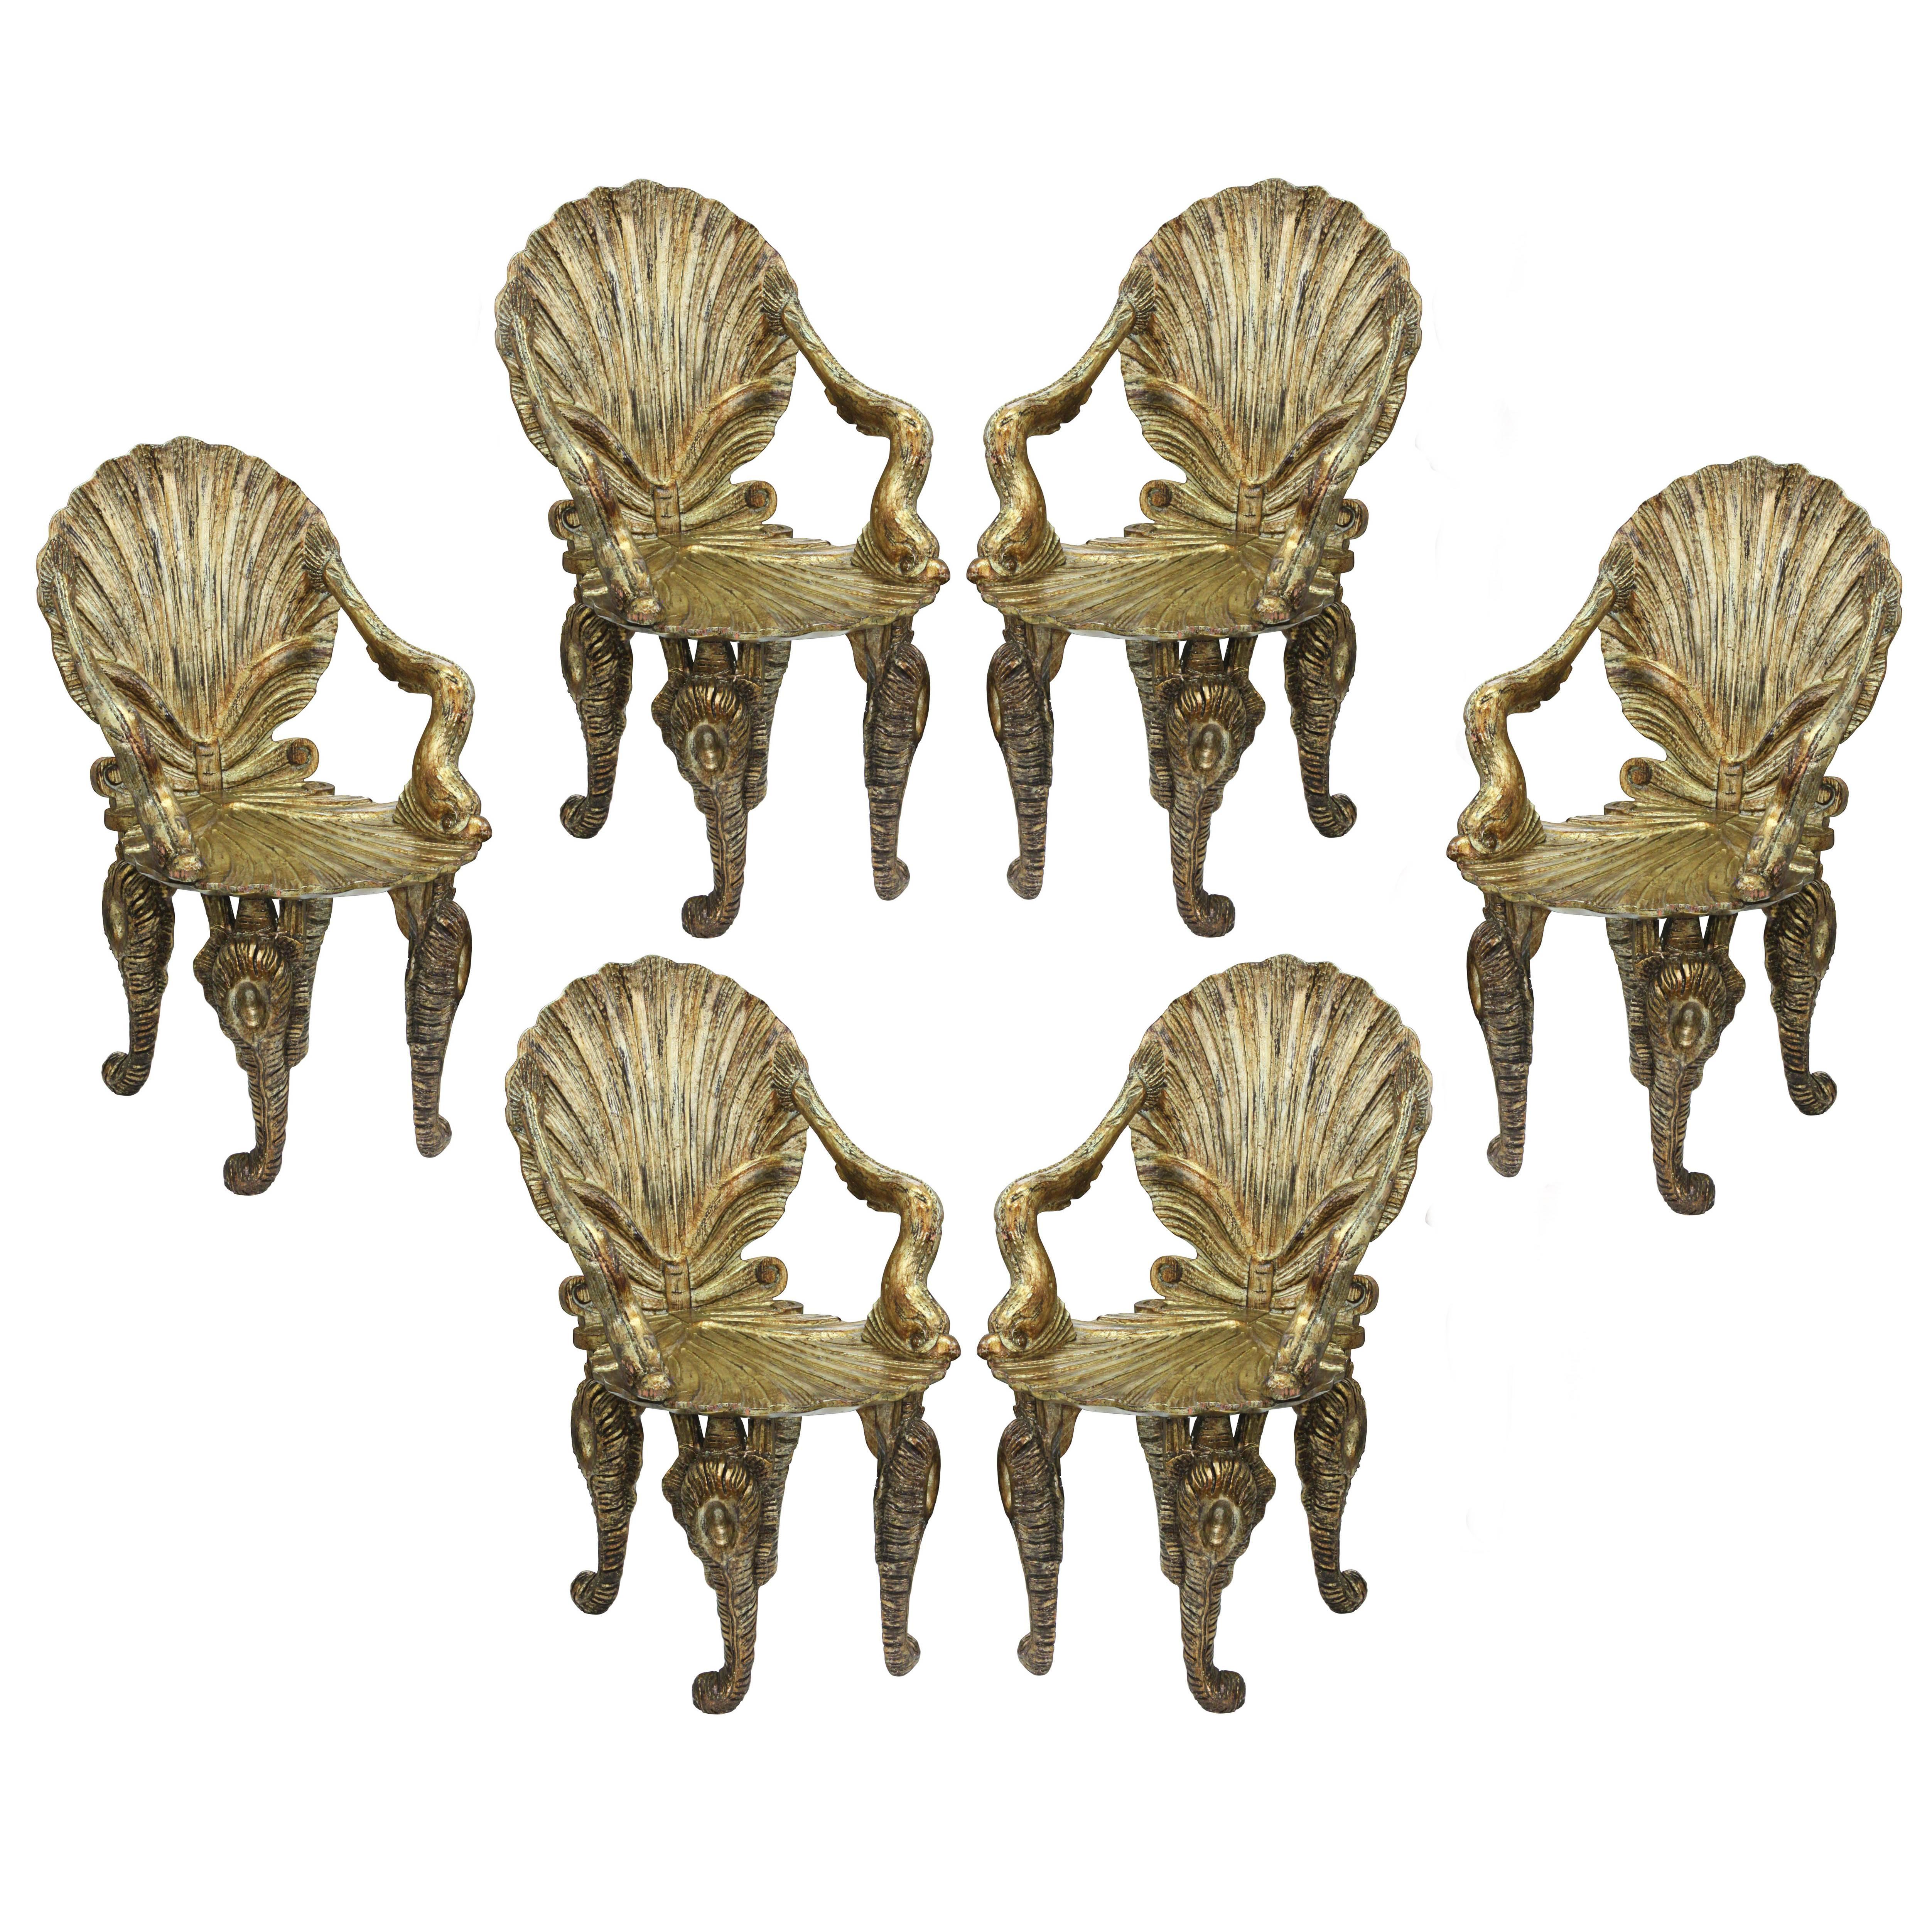 Set of Six Extraordinary Gilded Grotto Chairs by David Barrett